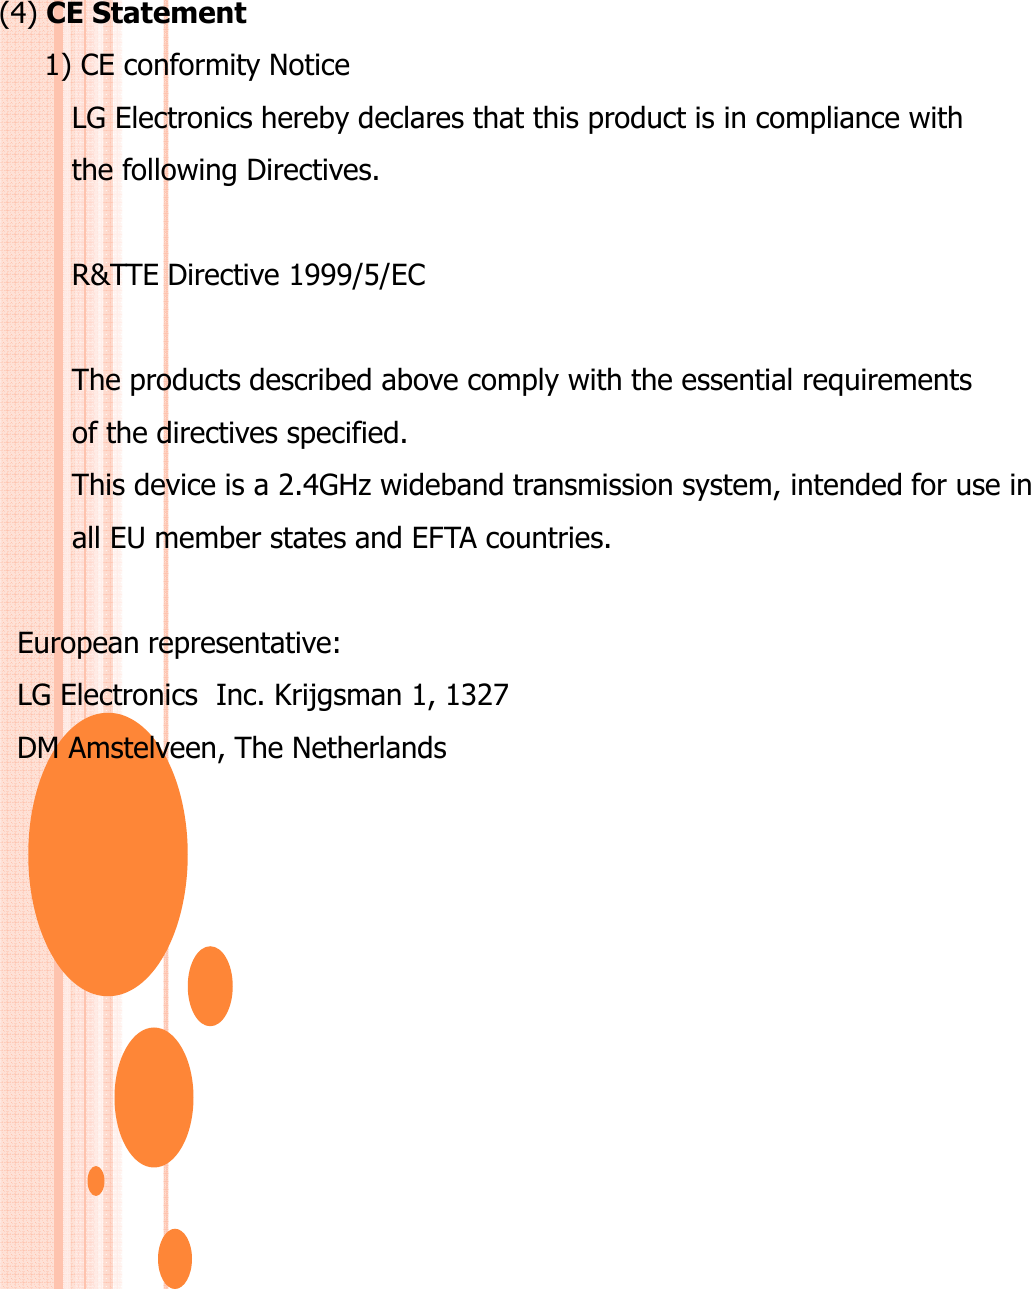 (4) CE Statement1) CE conformity NoticeLG Electronics hereby declares that this product is in compliance with the following Directives. R&amp;TTE Directive 1999/5/EC The products described above comply with the essential requirements of the directives specified. This device is a 2.4GHz wideband transmission system, intended for use inall EU member states and EFTA countries.European representative: LG Electronics  Inc. Krijgsman 1, 1327 DM Amstelveen, The Netherlands